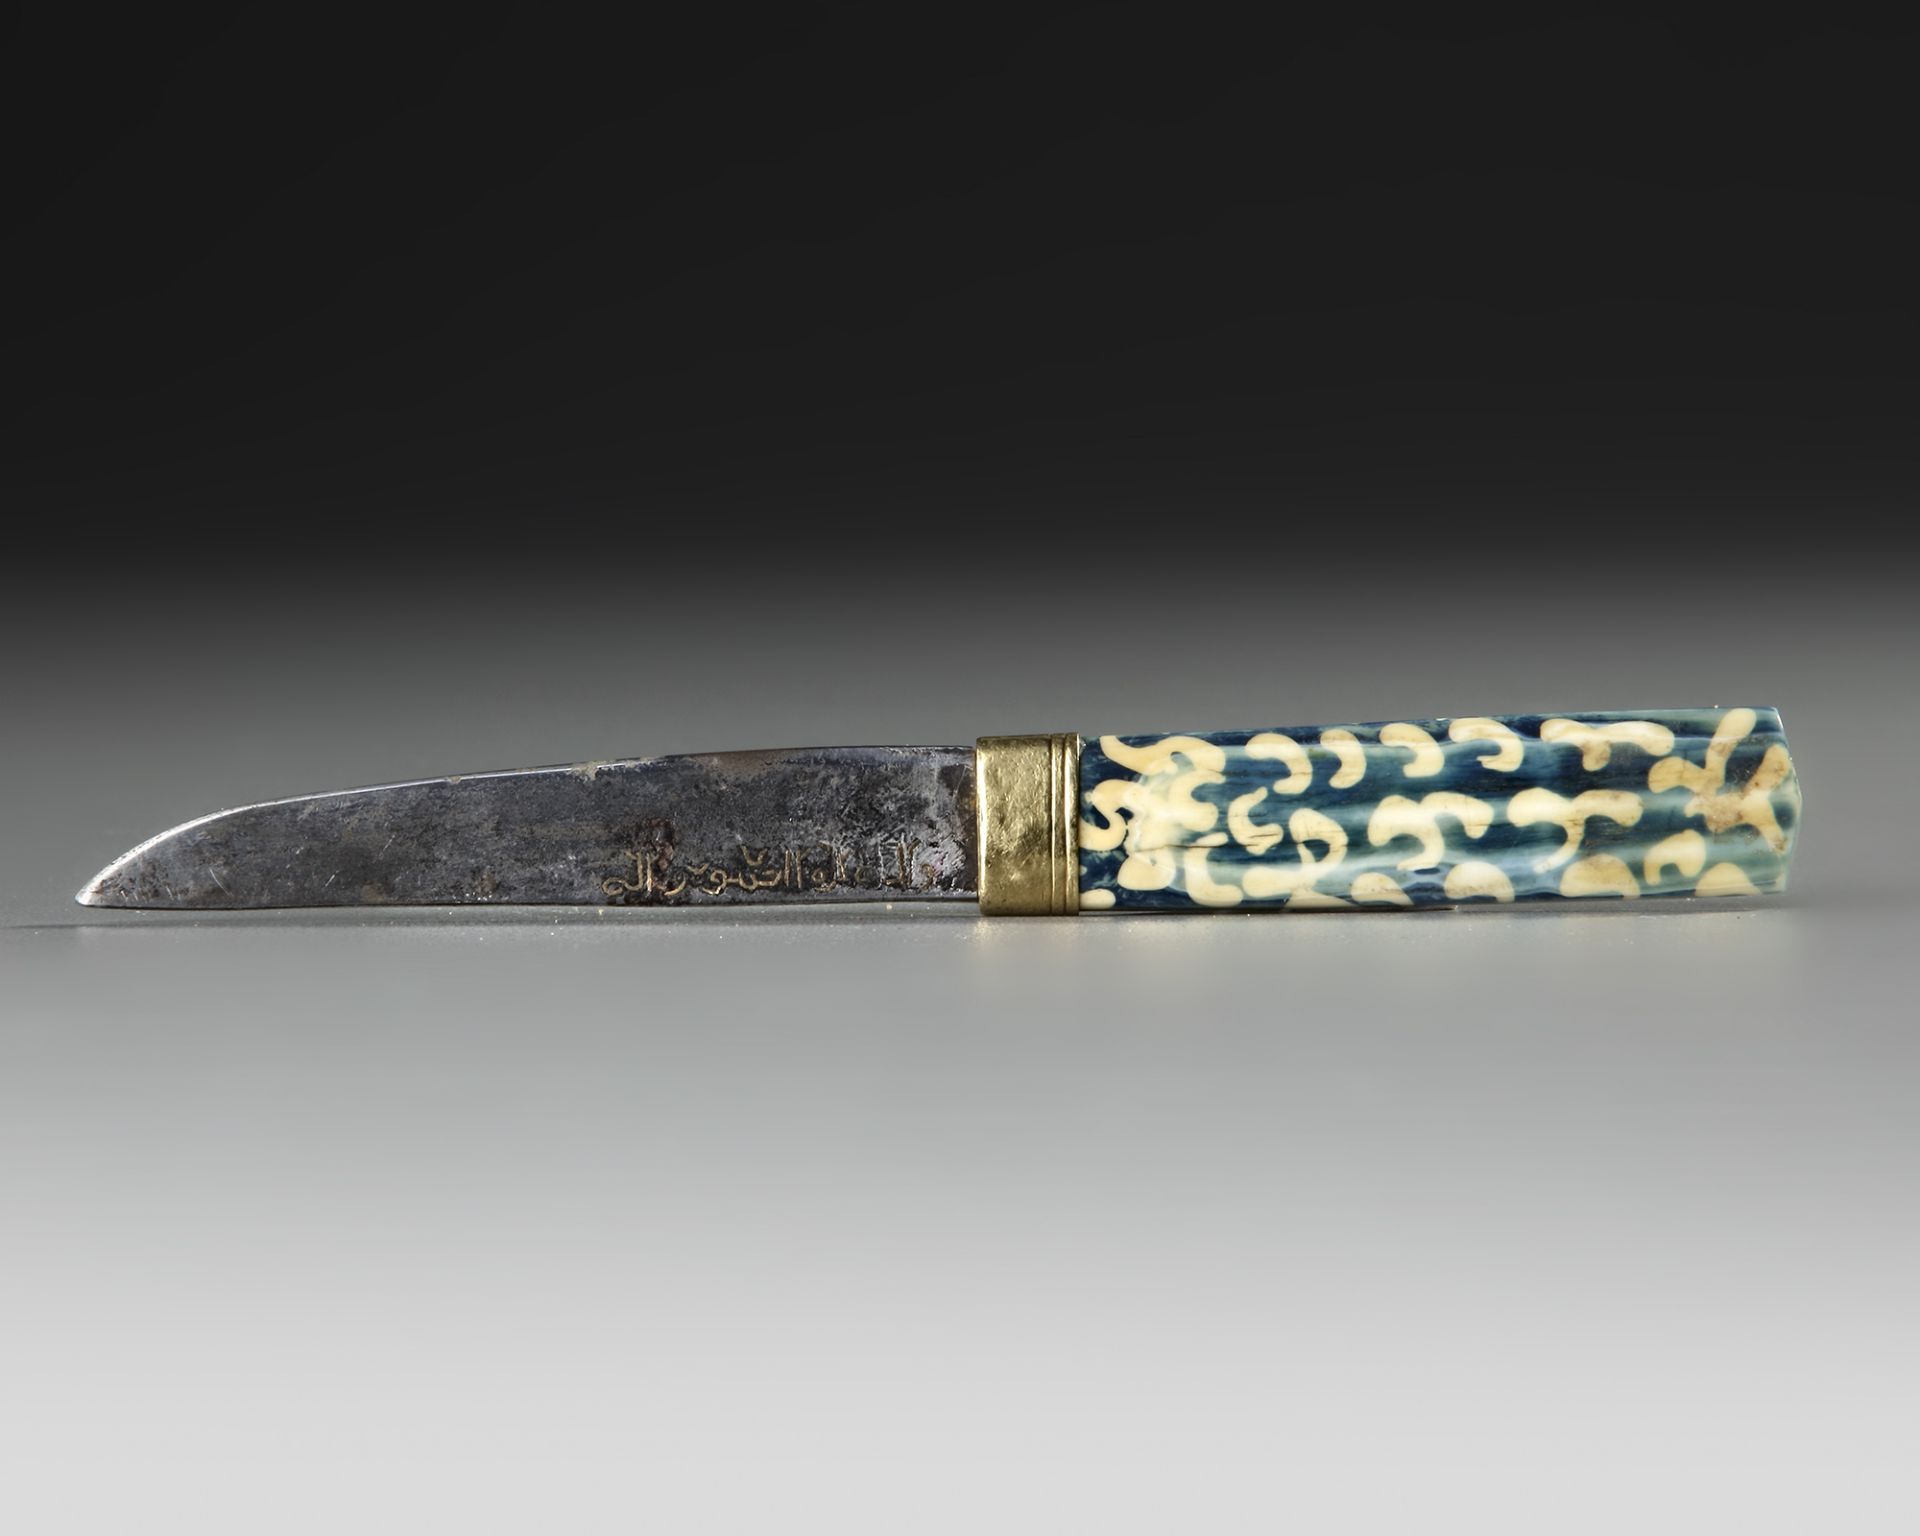 A SMALL INSCRIBED KNIFE, LATE TIMURID, 15TH-16TH CENTURY - Image 8 of 12